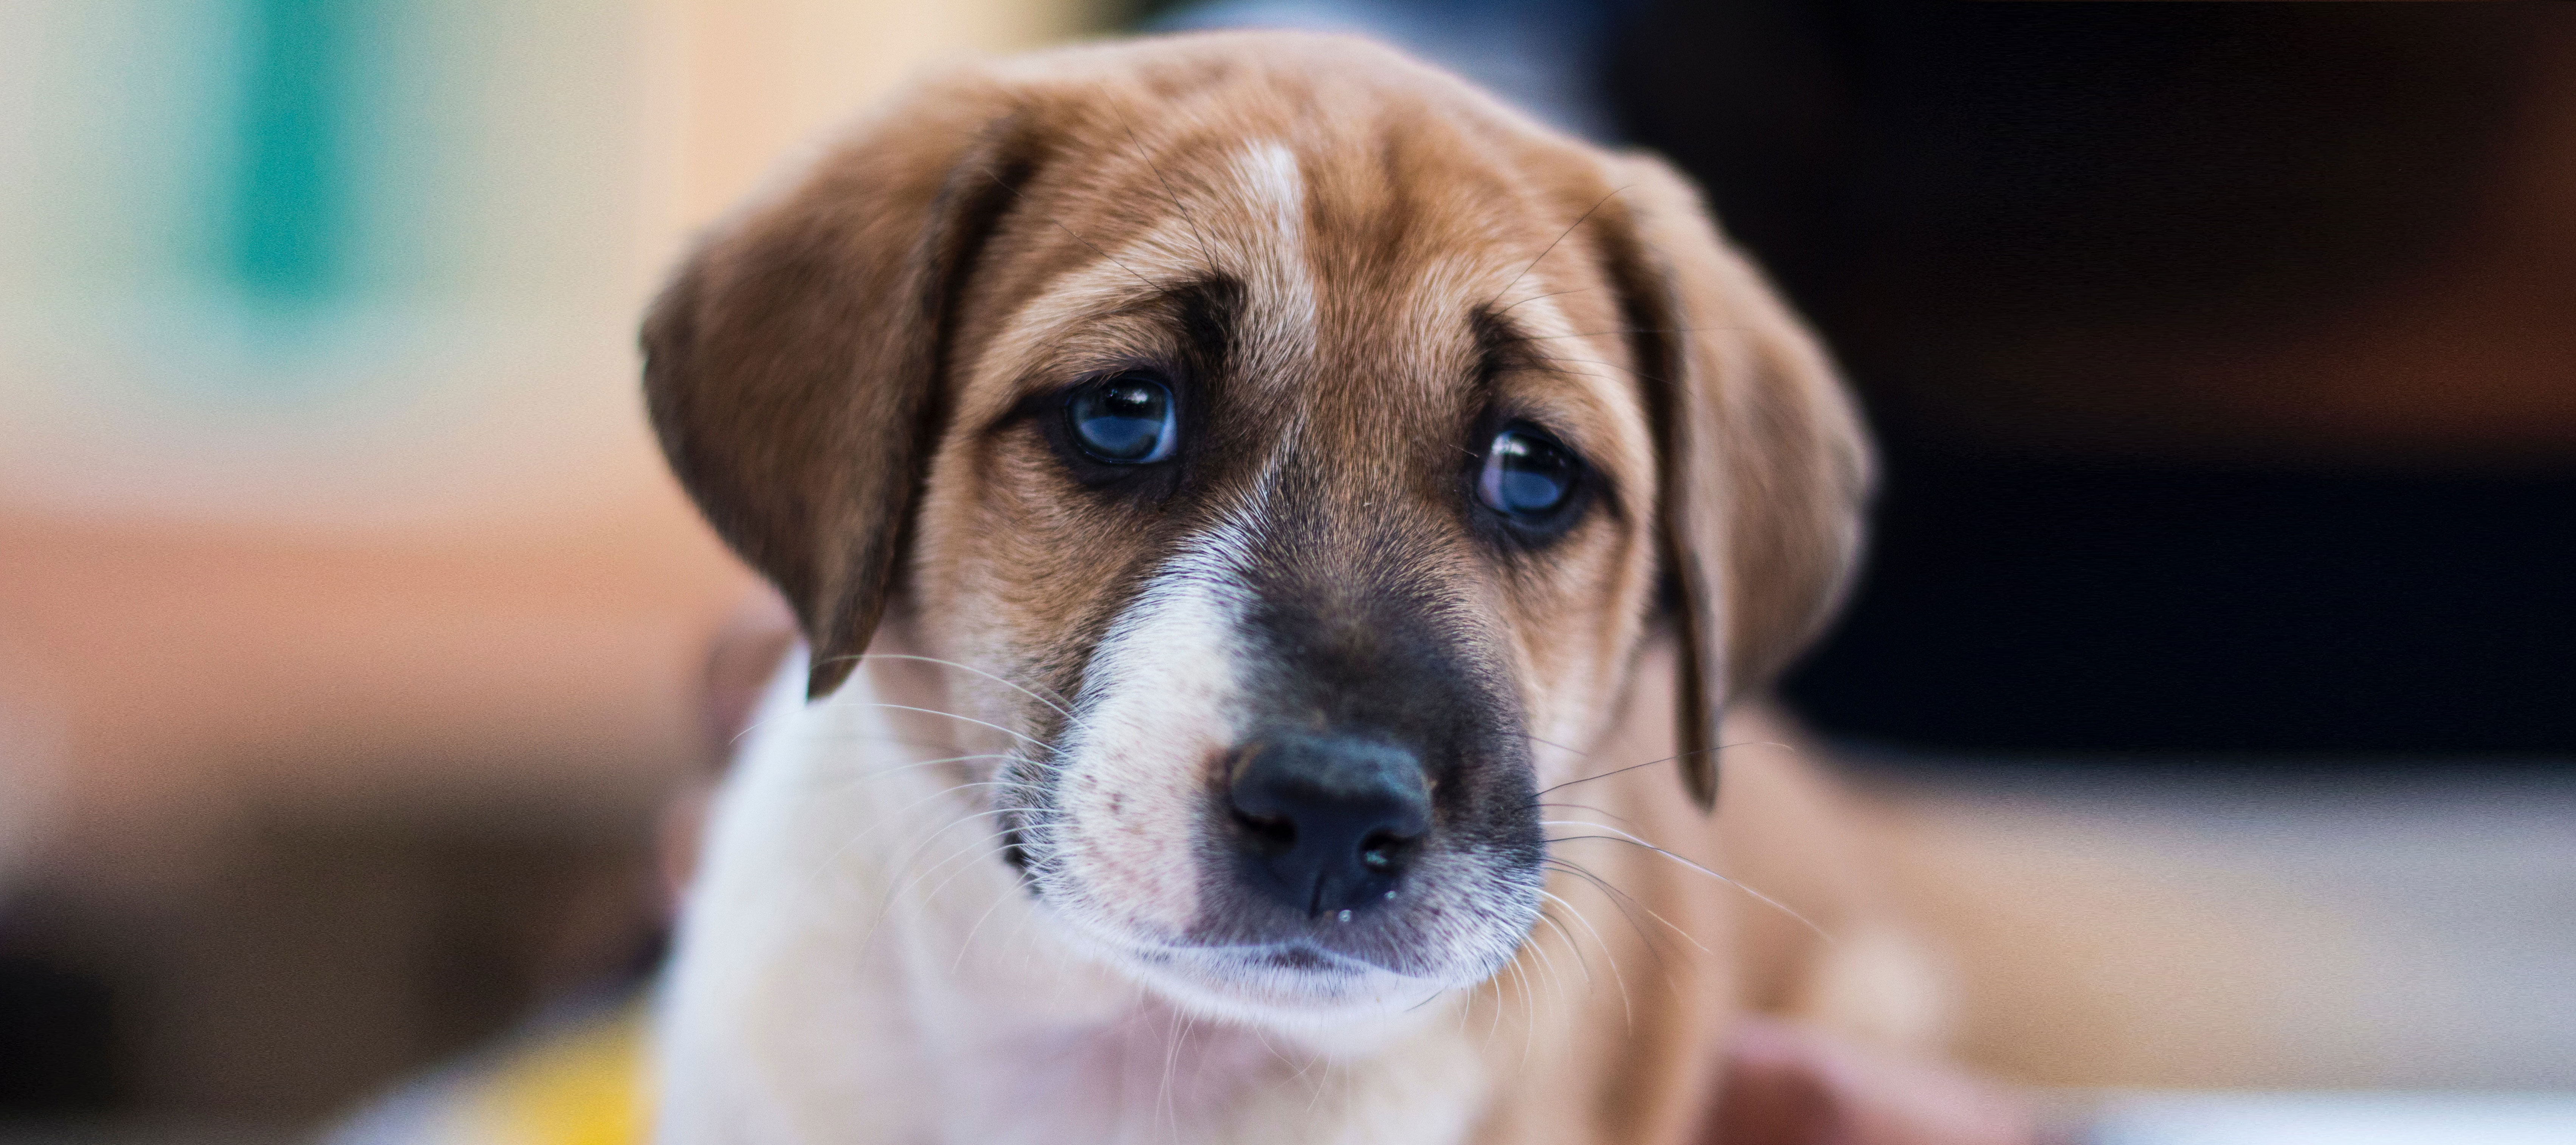 heroic-fundraising-blog-featured-image-dog-puppy-eyes-eye-contact